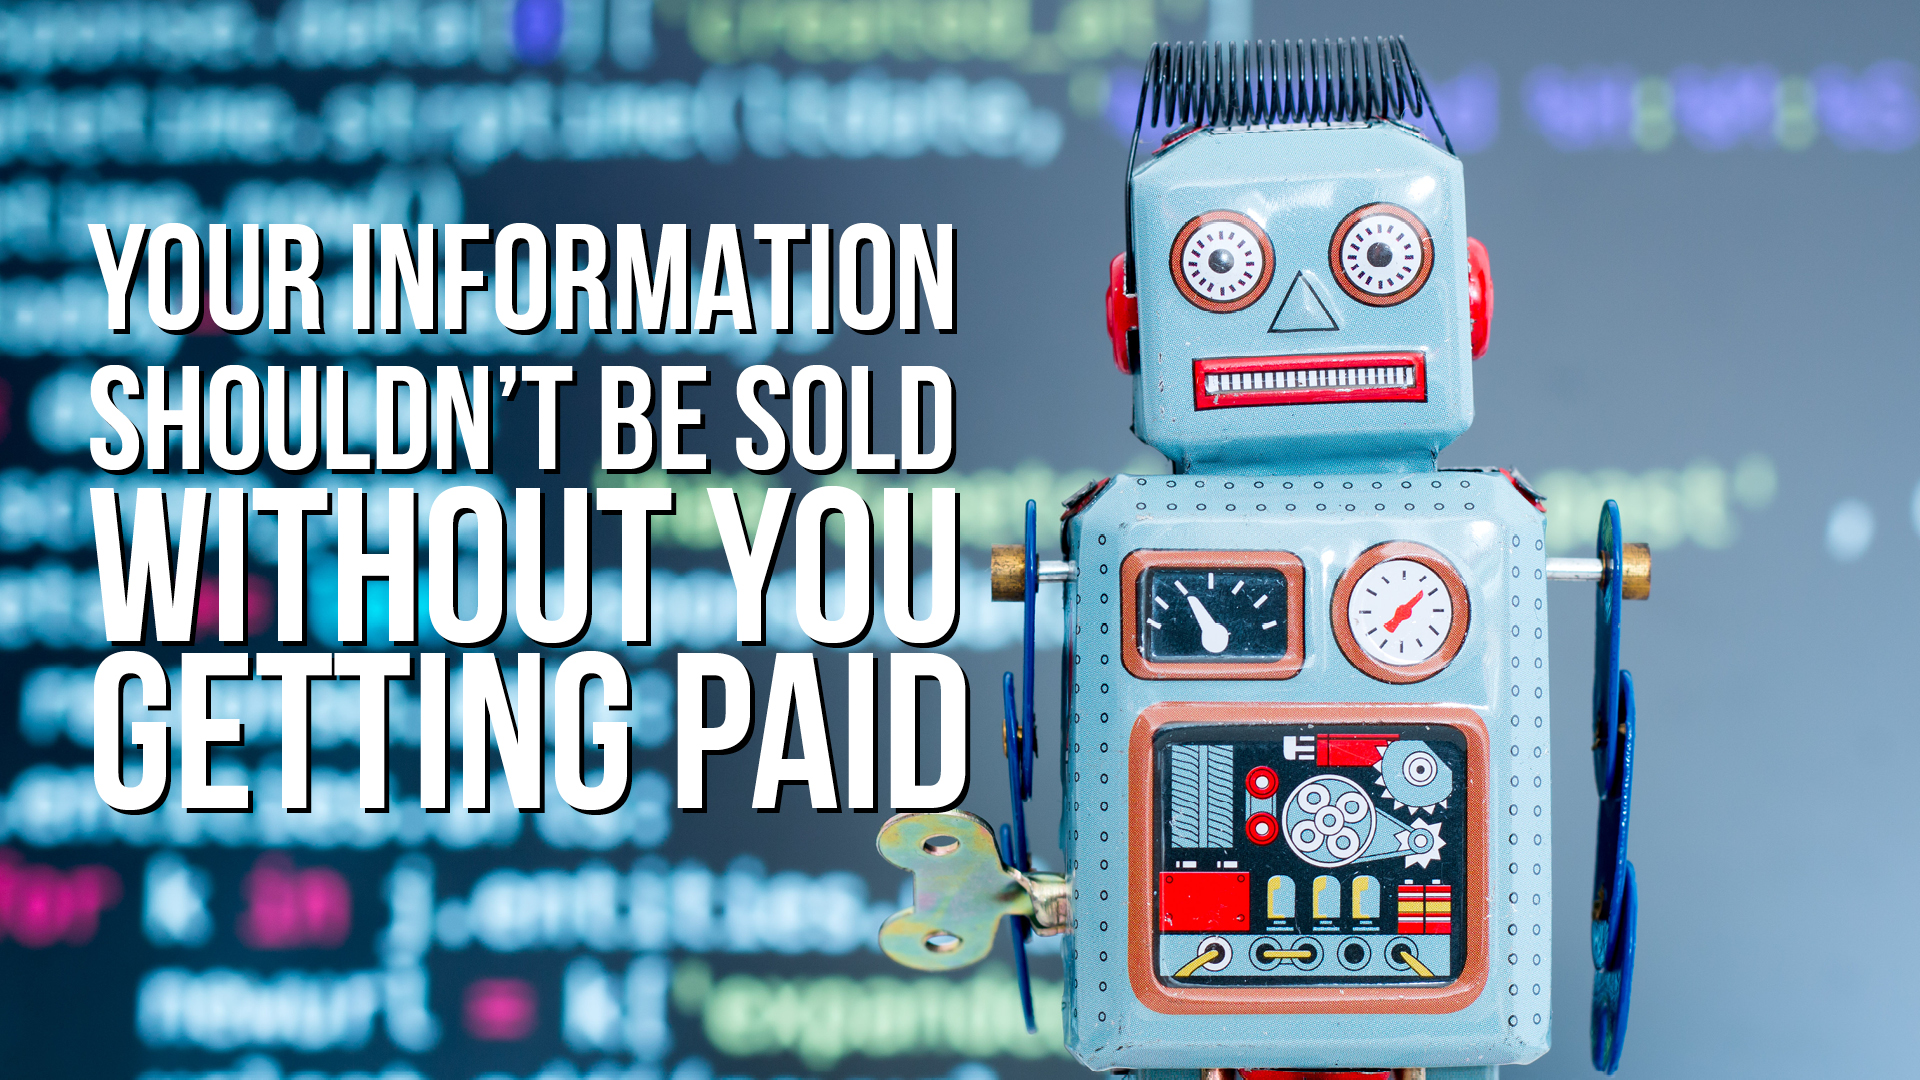 Your info shouldn't get sold without you getting paid